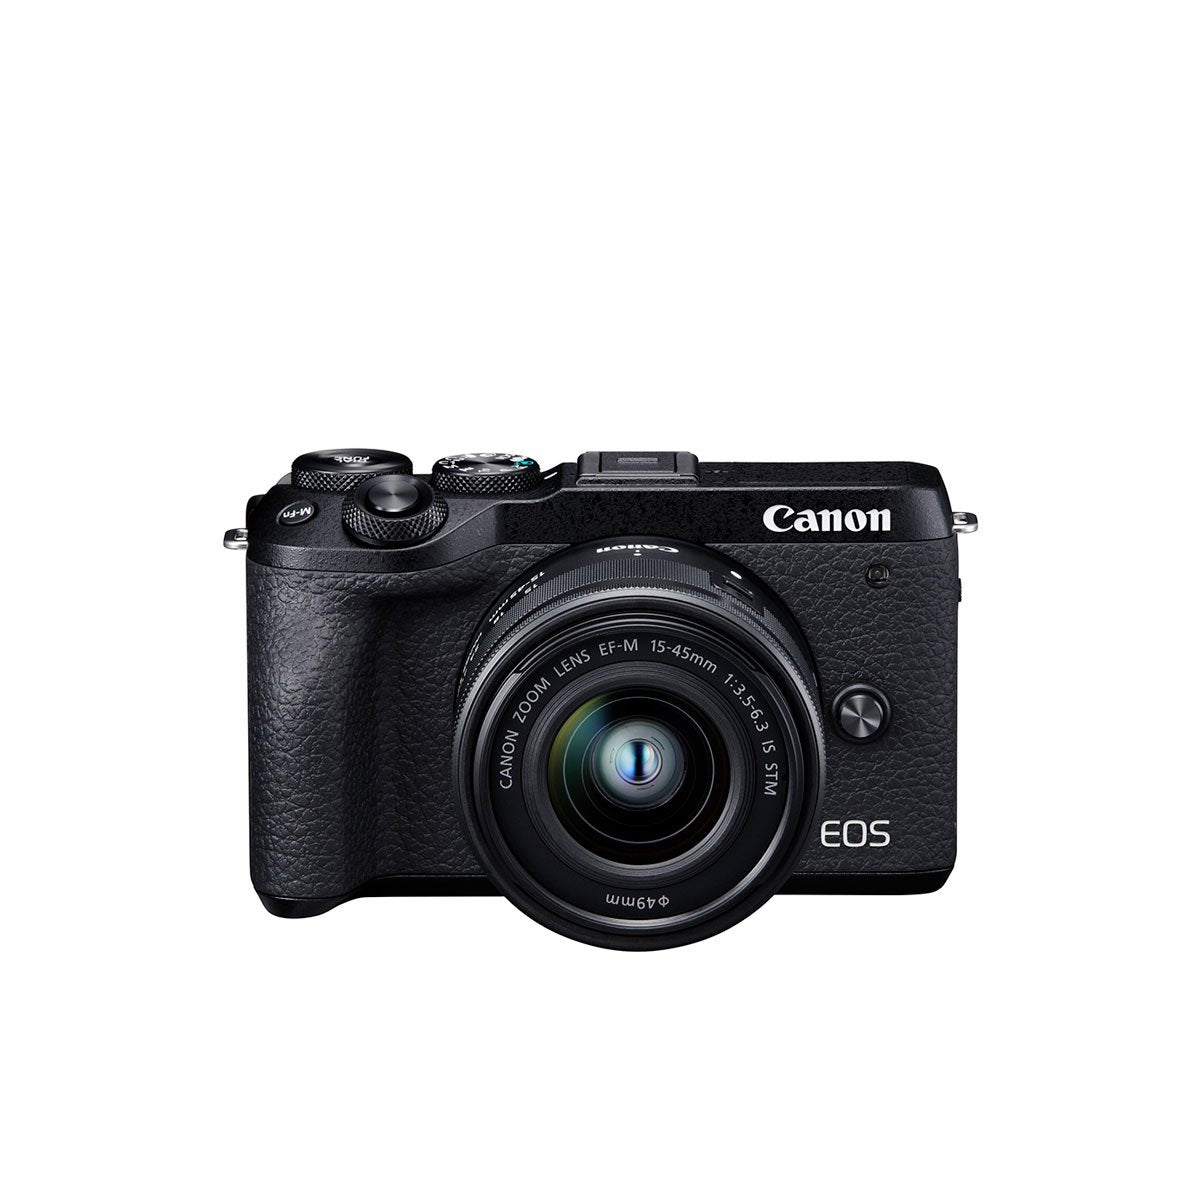 Canon EOS M6 Mark II Mirrorless Camera with EF-M 15-45mm IS STM Lens Specialty Kit (Black)